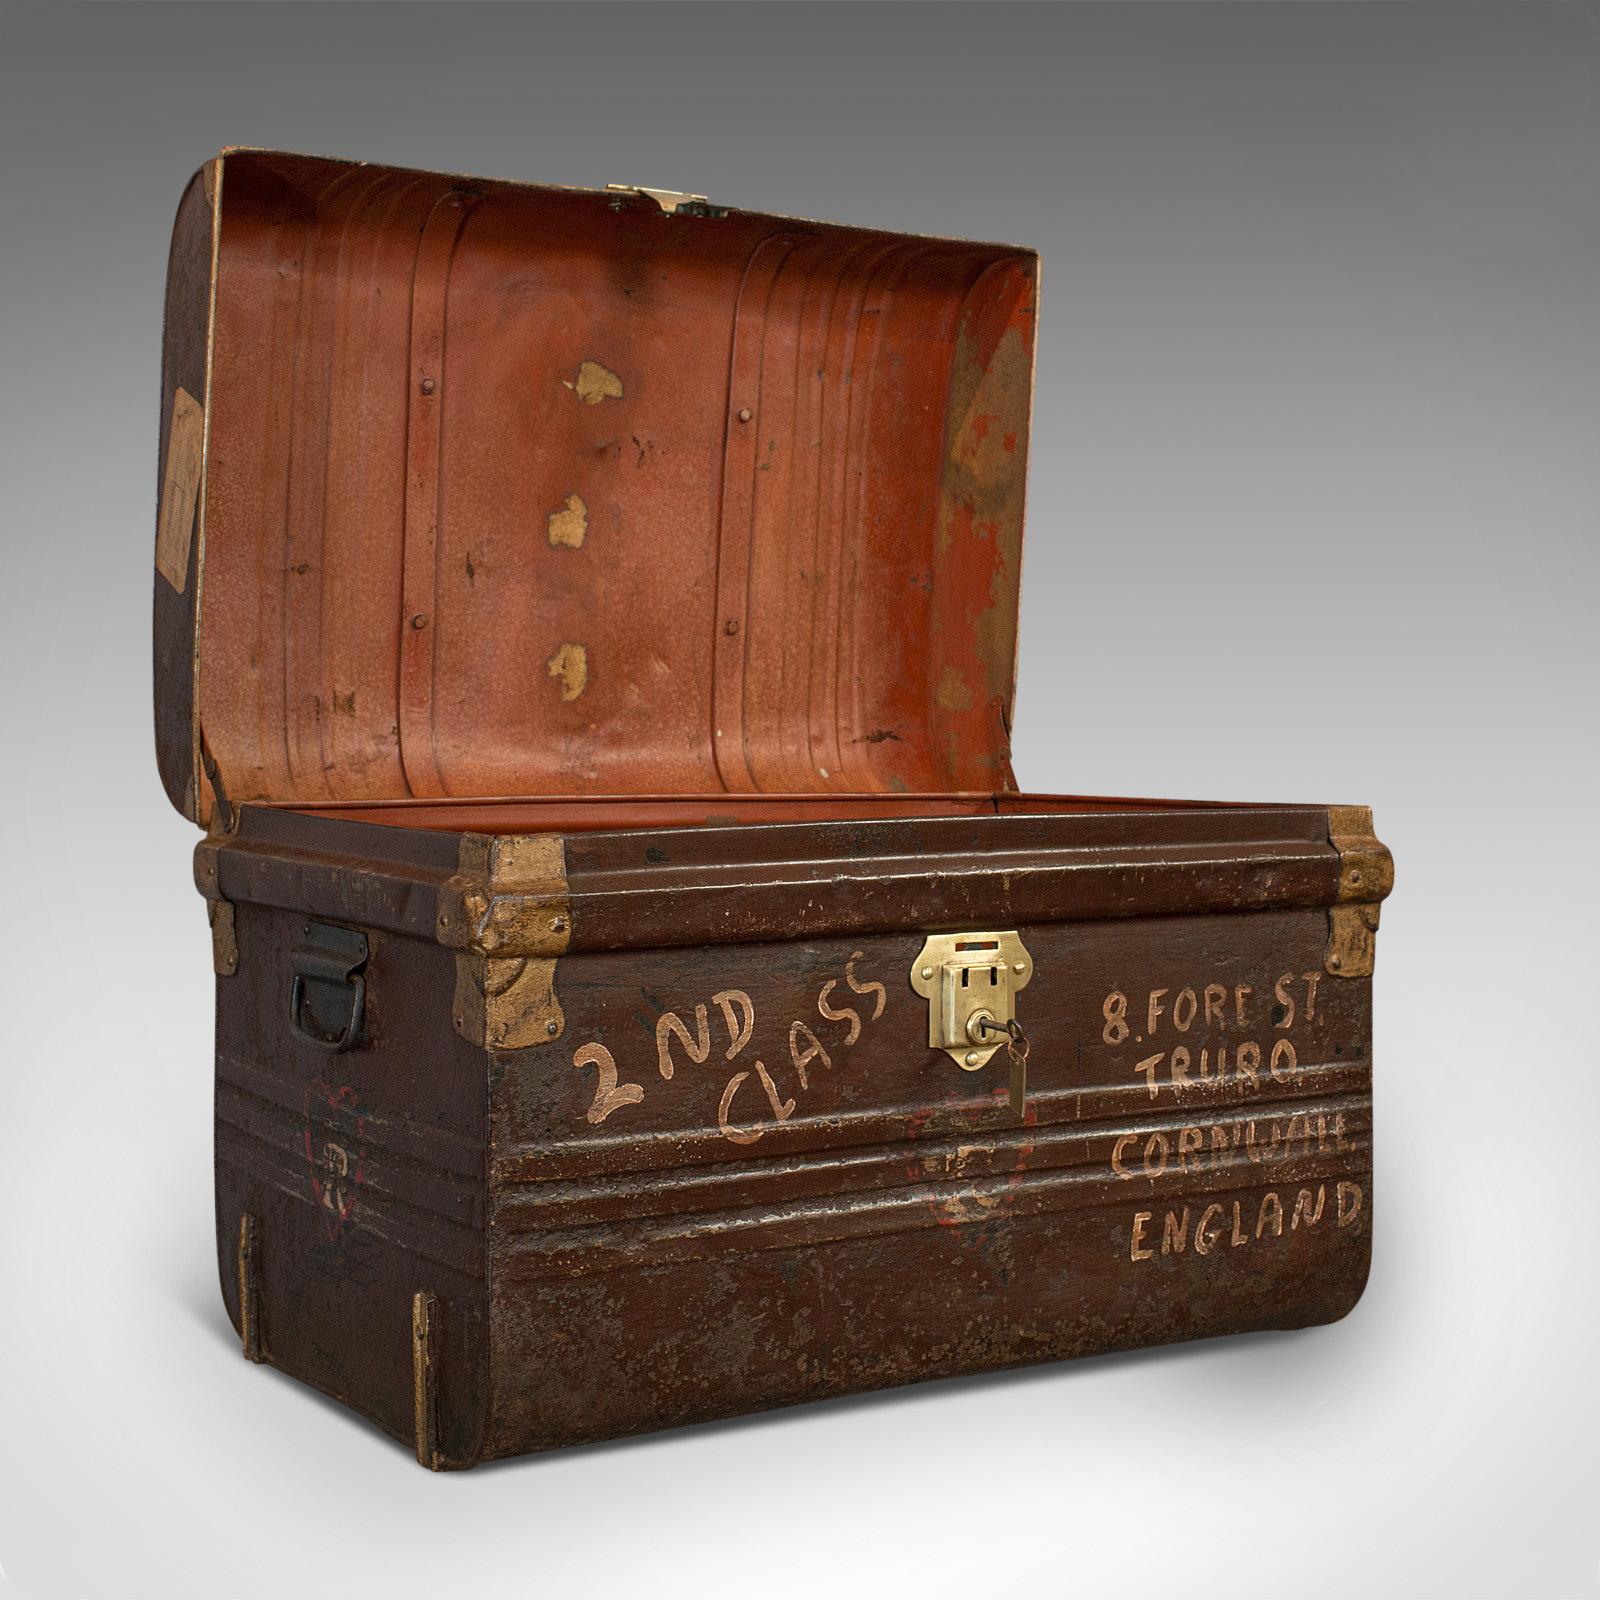 This is an antique carriage trunk. An English, steel railway or steamer chest, dating to the late Victorian period, circa 1900.

Abundant period detail
Displays a desirable aged patina
Painted steel in good order throughout
Brass shoulders and